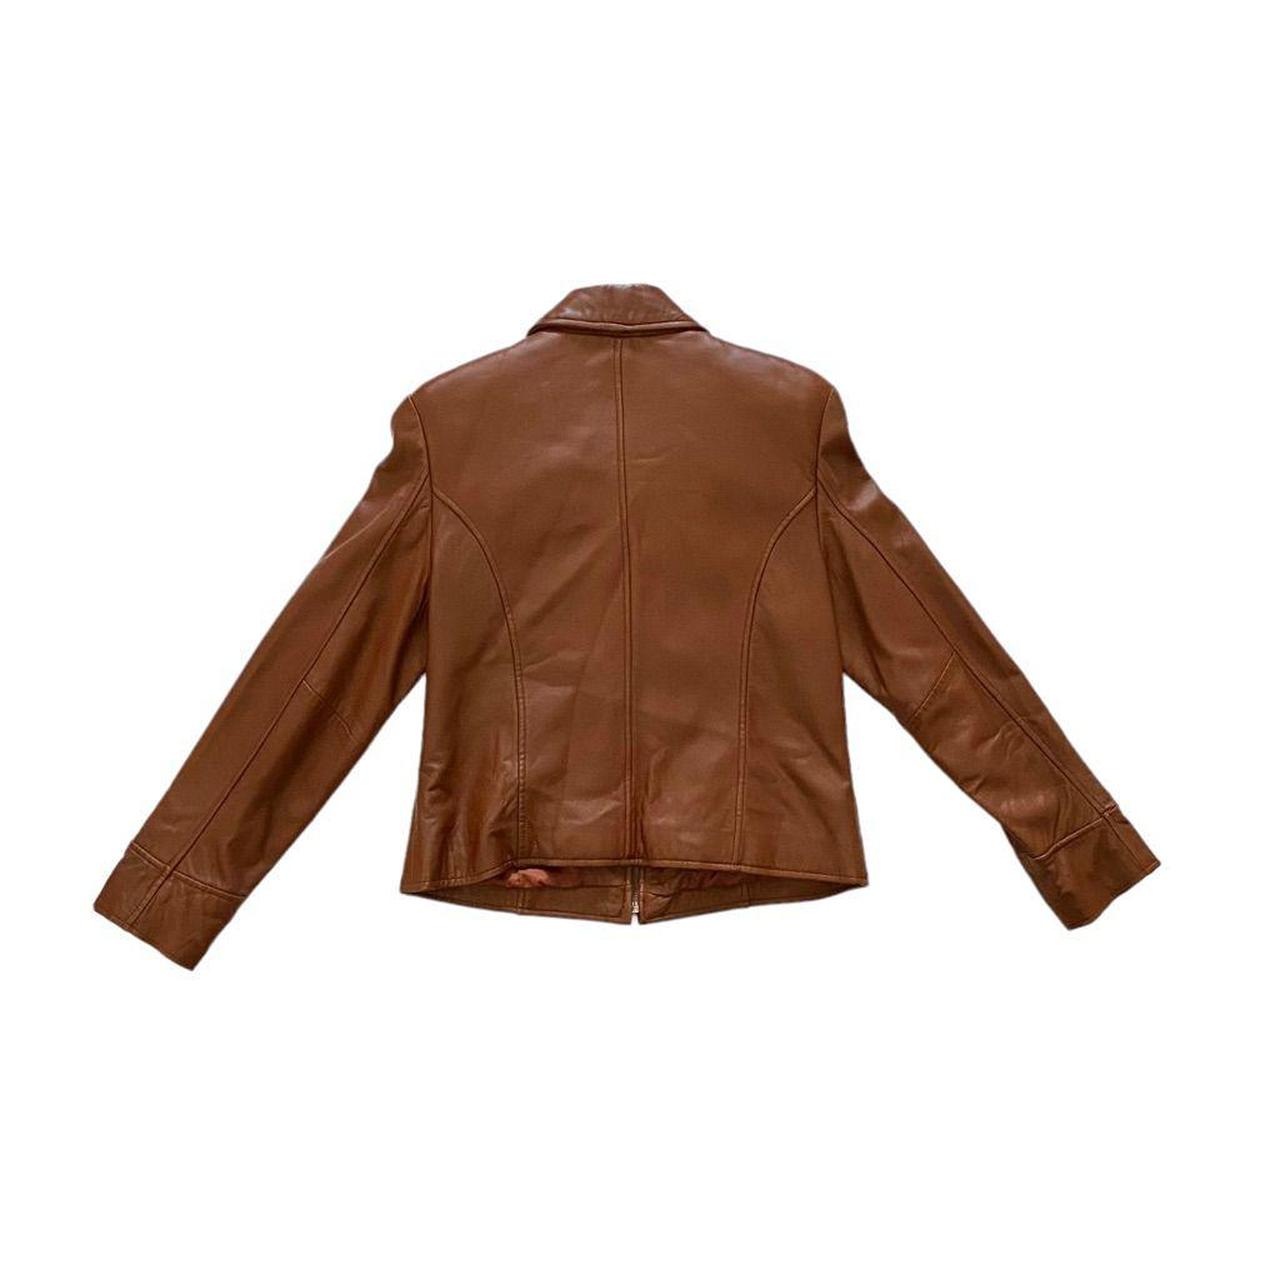 Product Image 2 - vintage soft leather jacket

FEATURES:
beauuutiful true